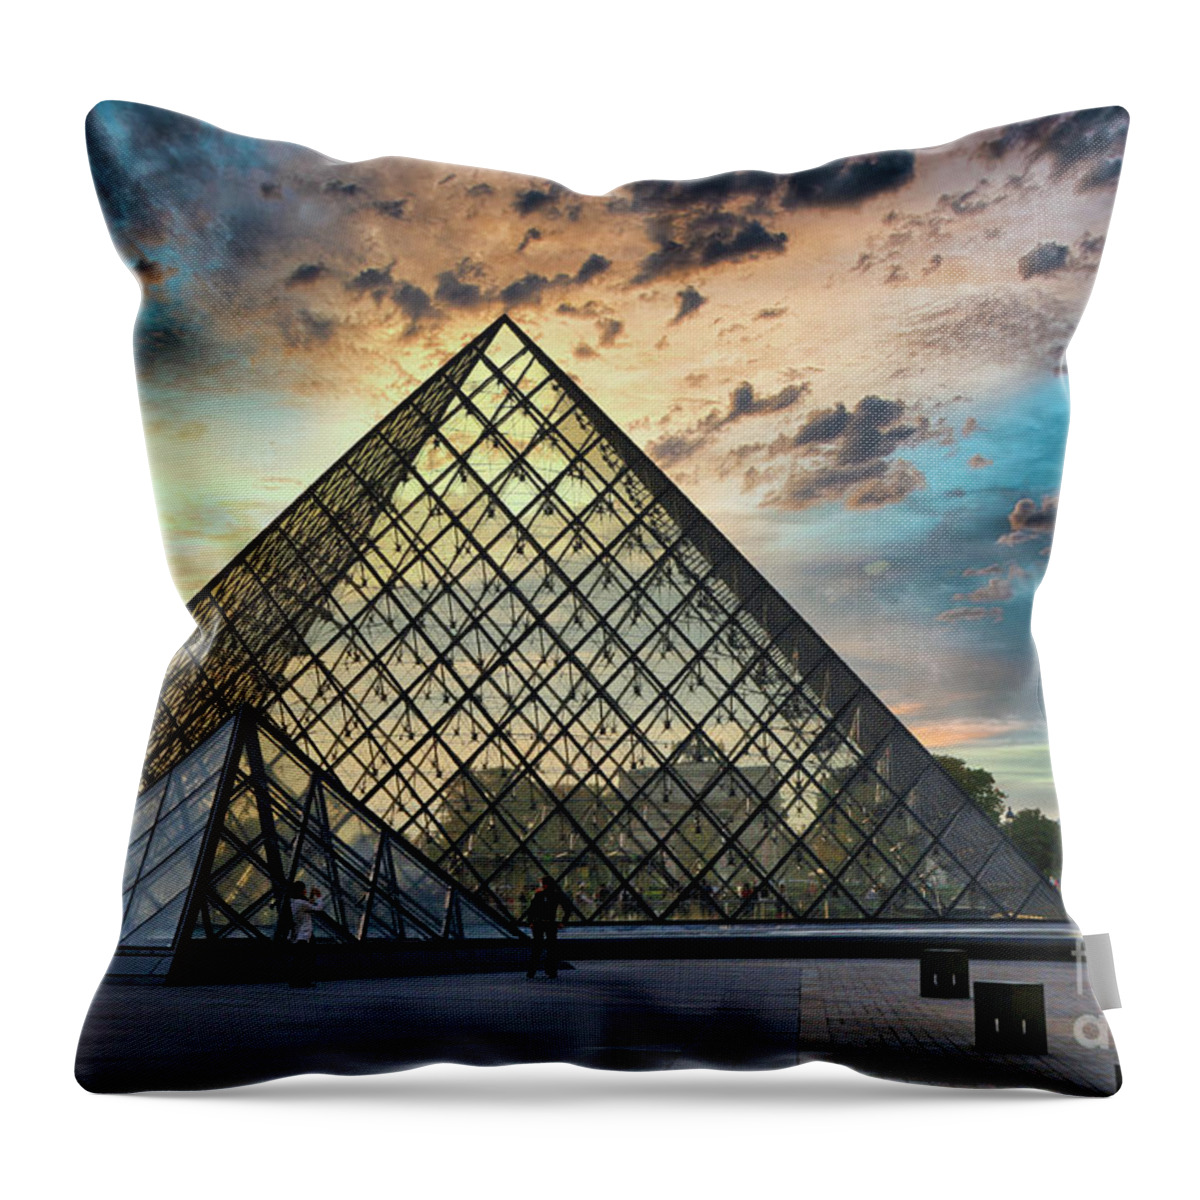 France Throw Pillow featuring the photograph The Louver Architecture Paris France by Chuck Kuhn